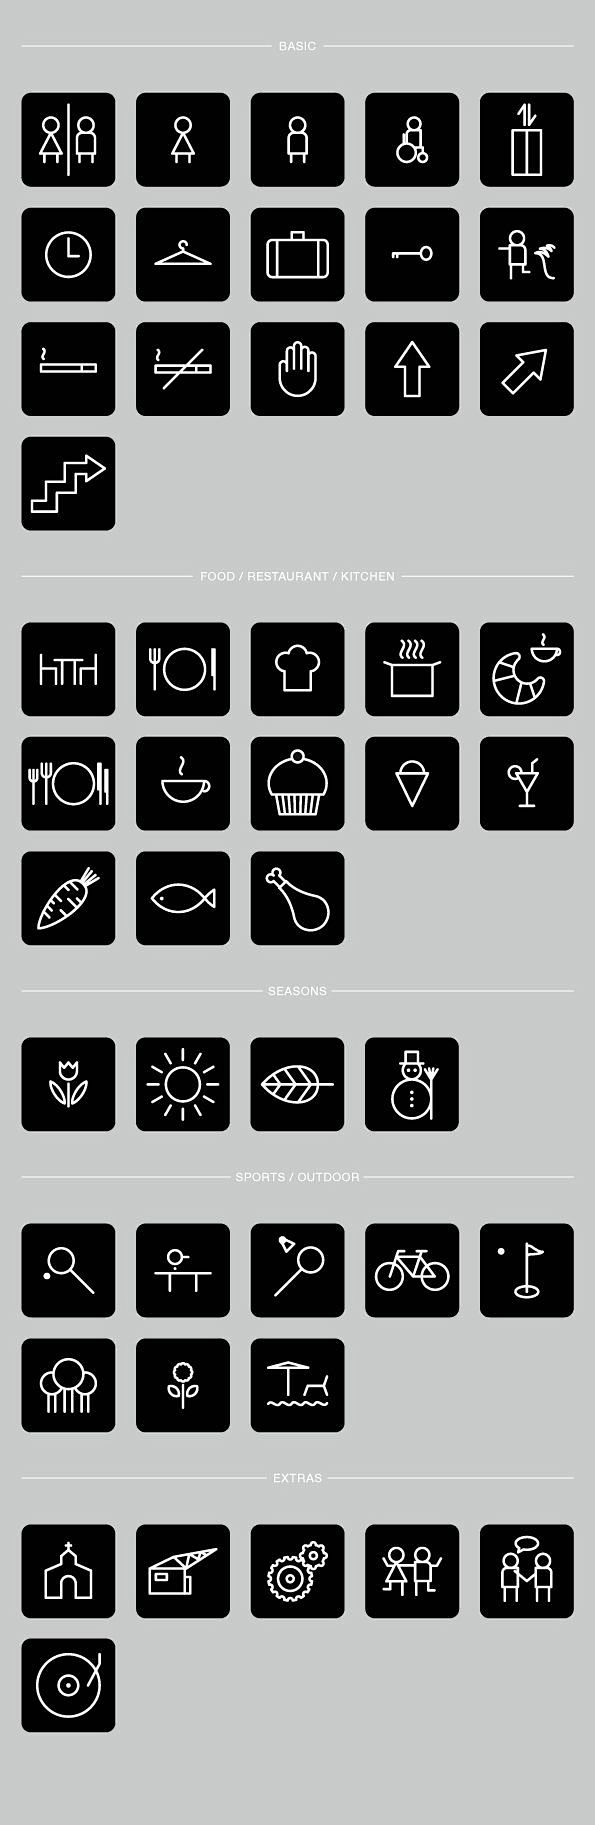 Hotel Pictograms - F...